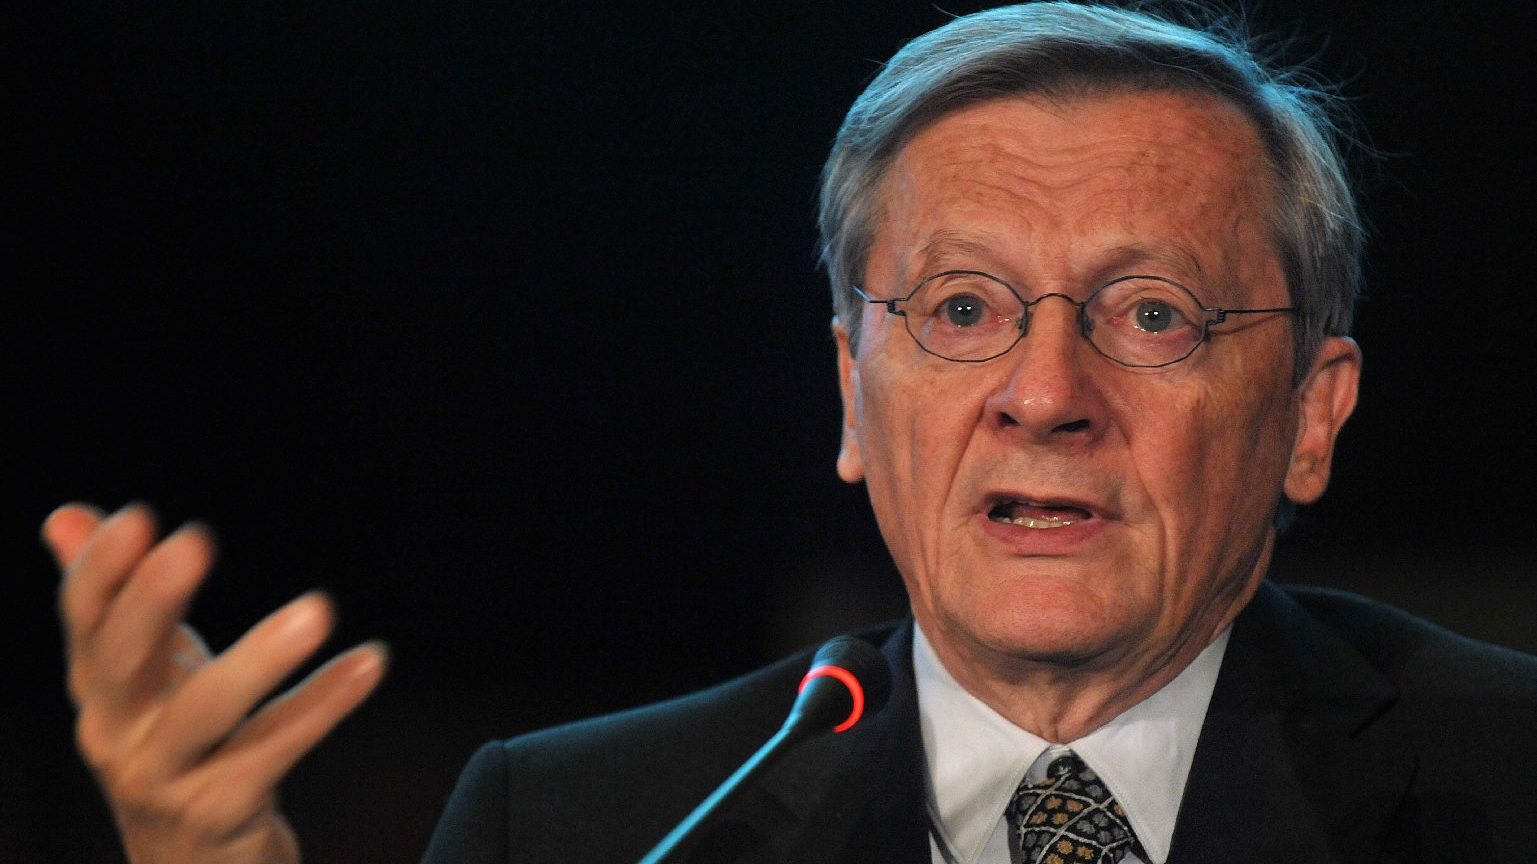 Ukraine crisis: the former Austrian chancellor resigns from the supervisory board of Lukoil